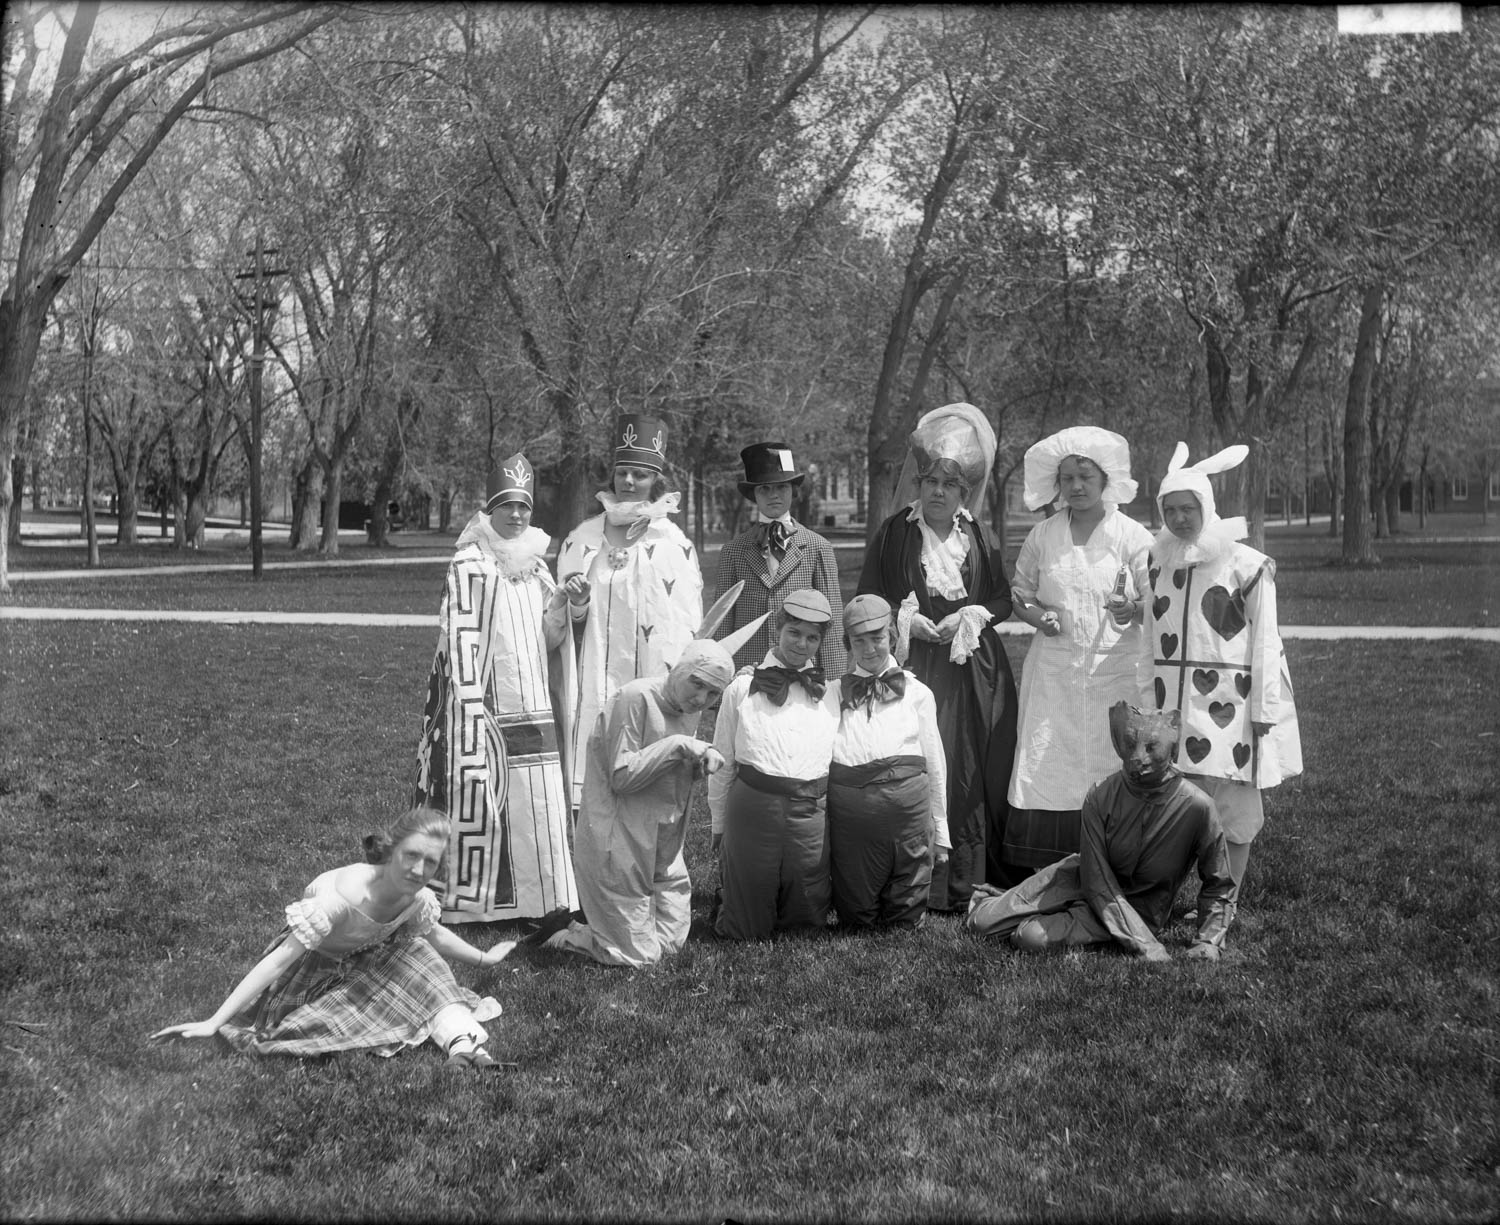 A group of individuals dressed as various characters from Alice in Wonderland, including Alice, Tweedle-Dee and Tweedle-Dum, the Queen of Hearts, the Mad Hatter, and the White Rabbit.